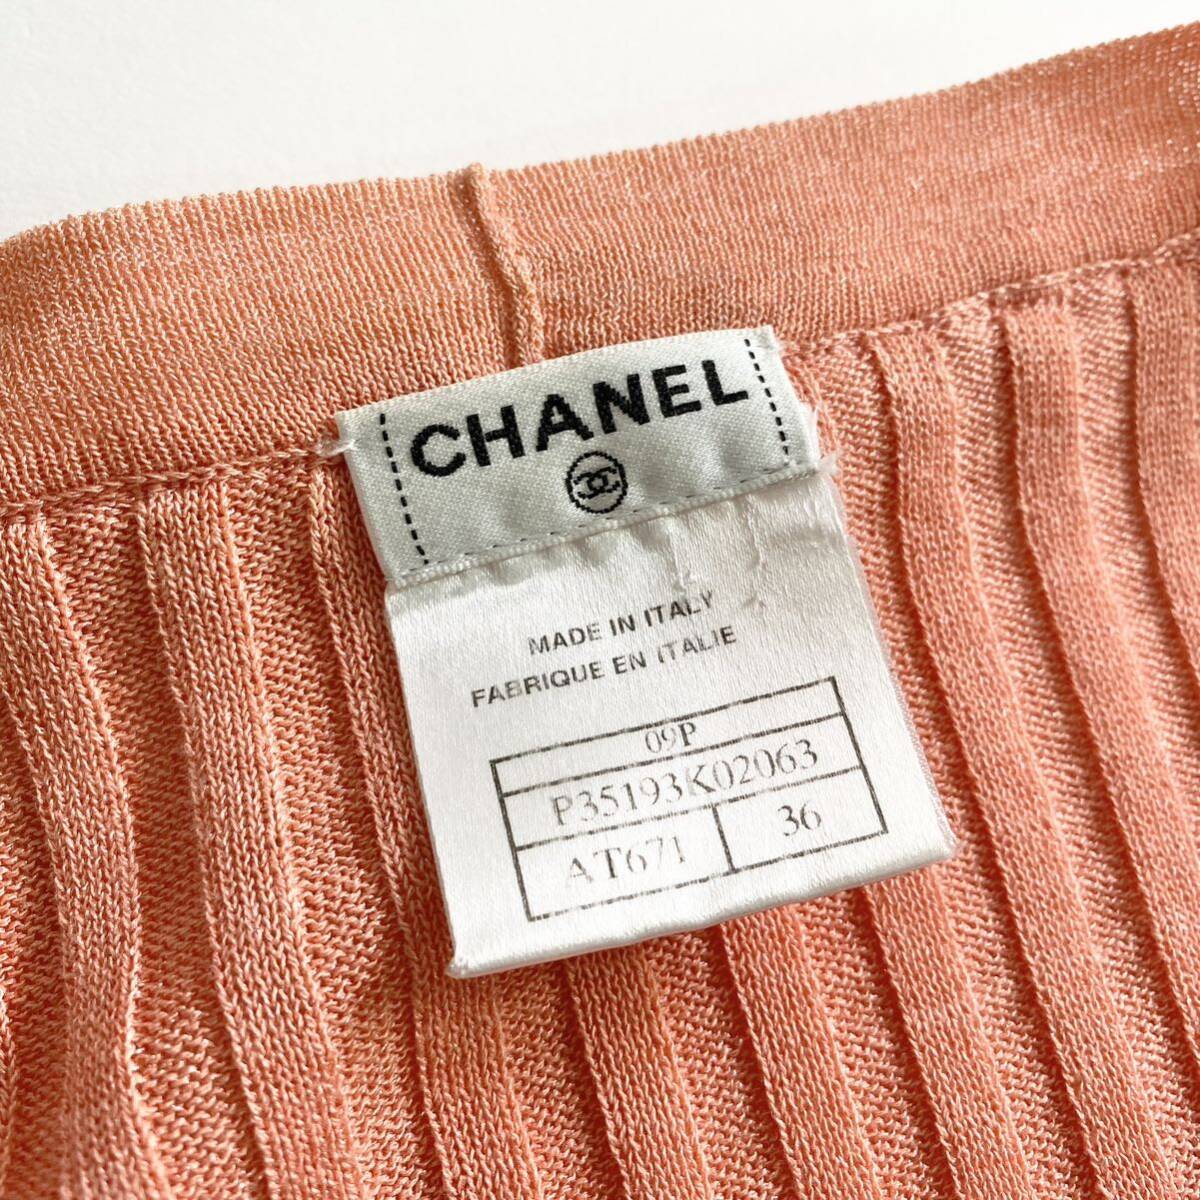 Nc27 Italy made CHANEL Chanel long knitted cardigan size 36 salmon Pink Lady -sV neck frill long sleeve tops feather woven 